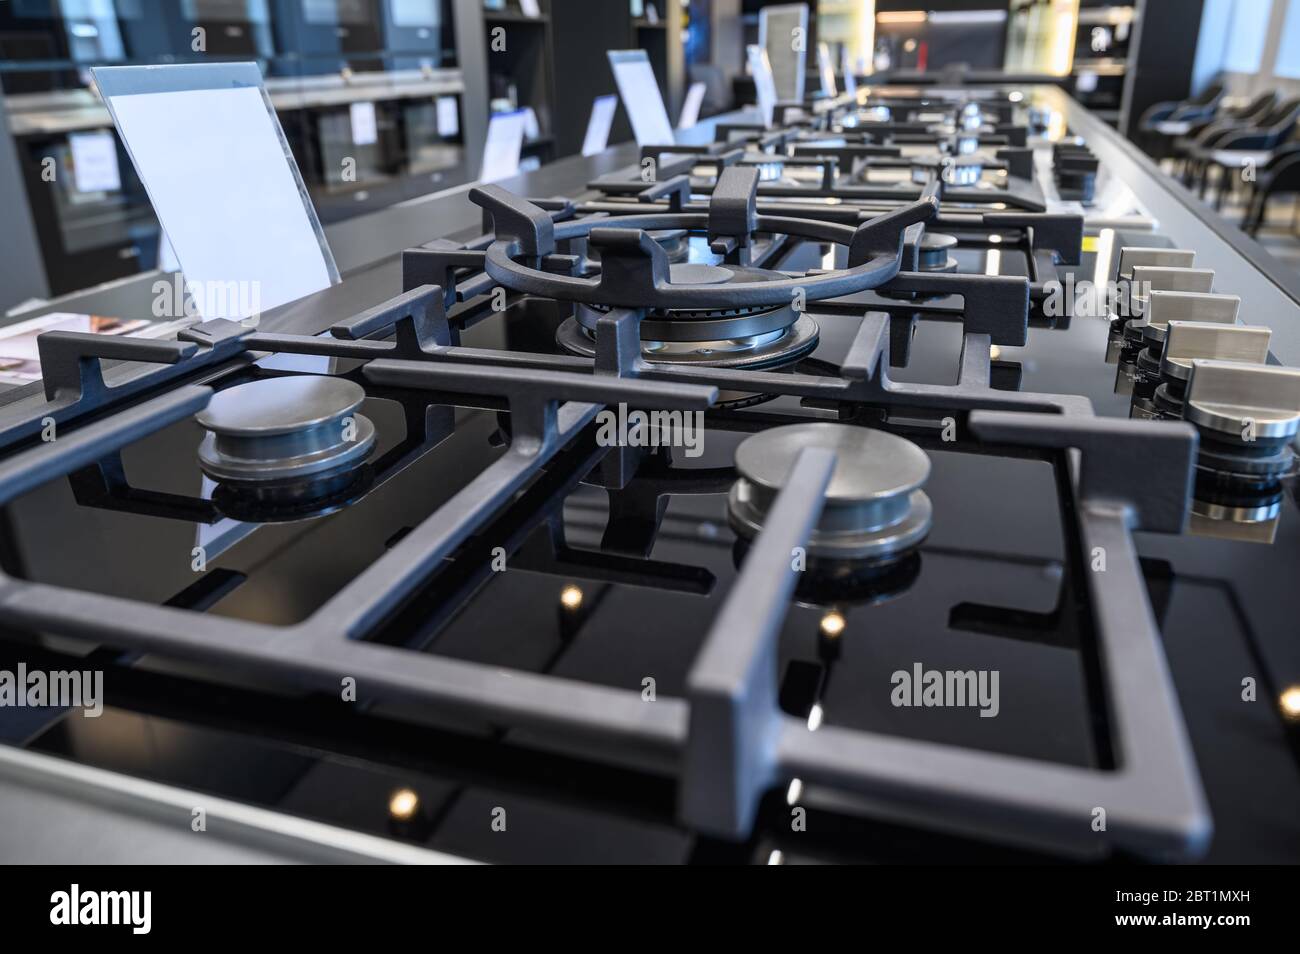 Electric stove top Cut Out Stock Images & Pictures - Alamy